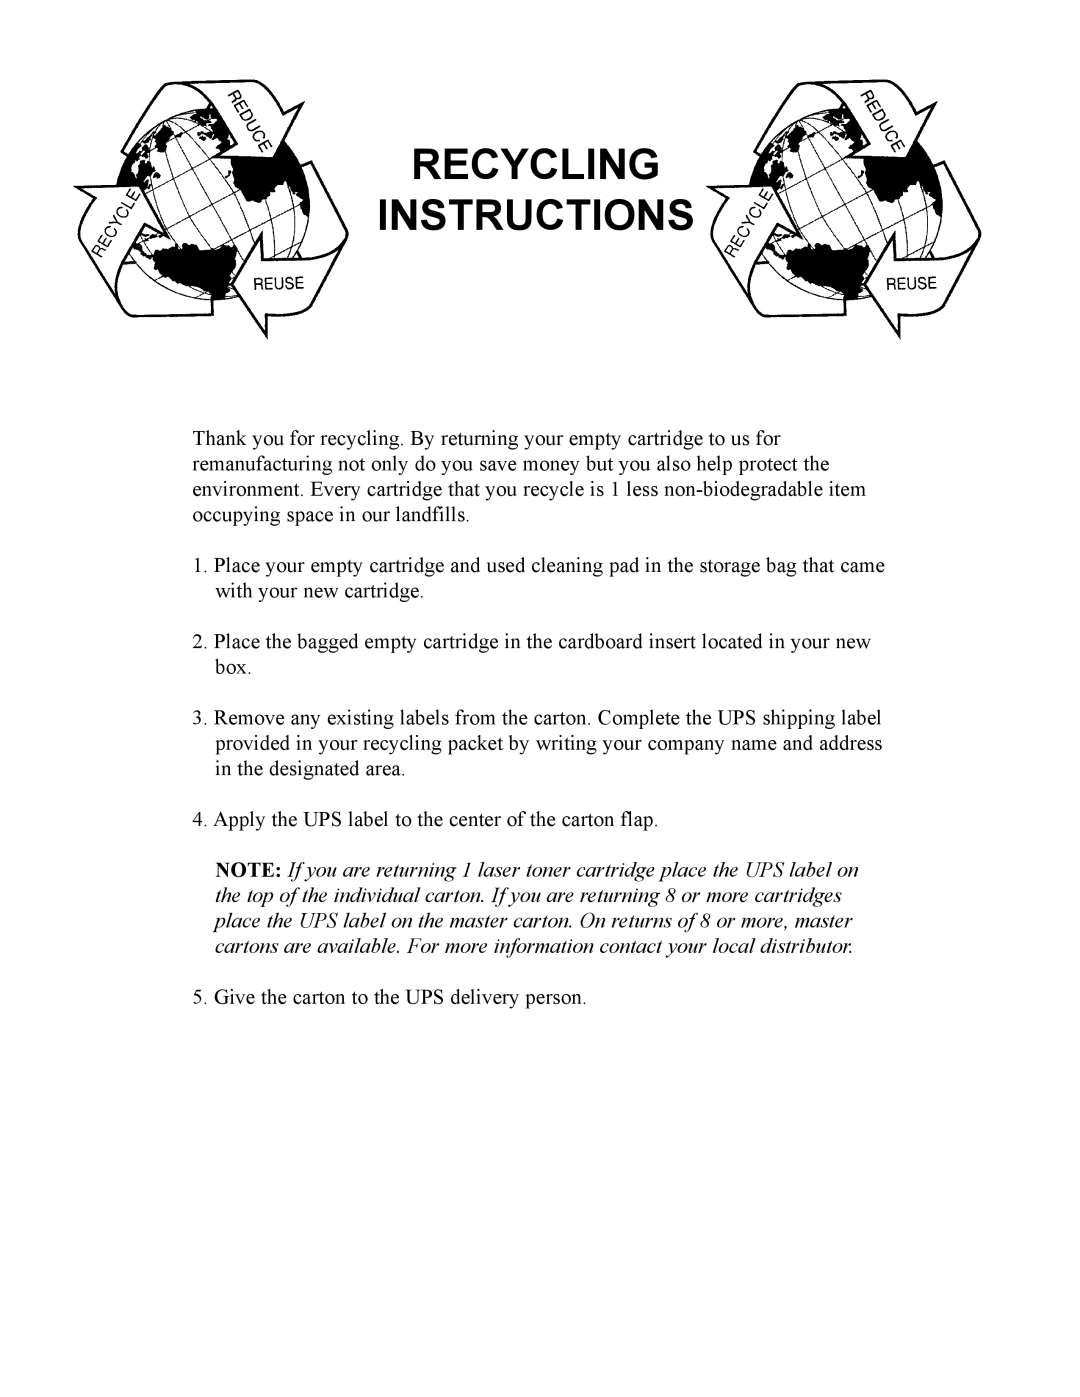 Lexmark 312 installation instructions Recycling Instructions 